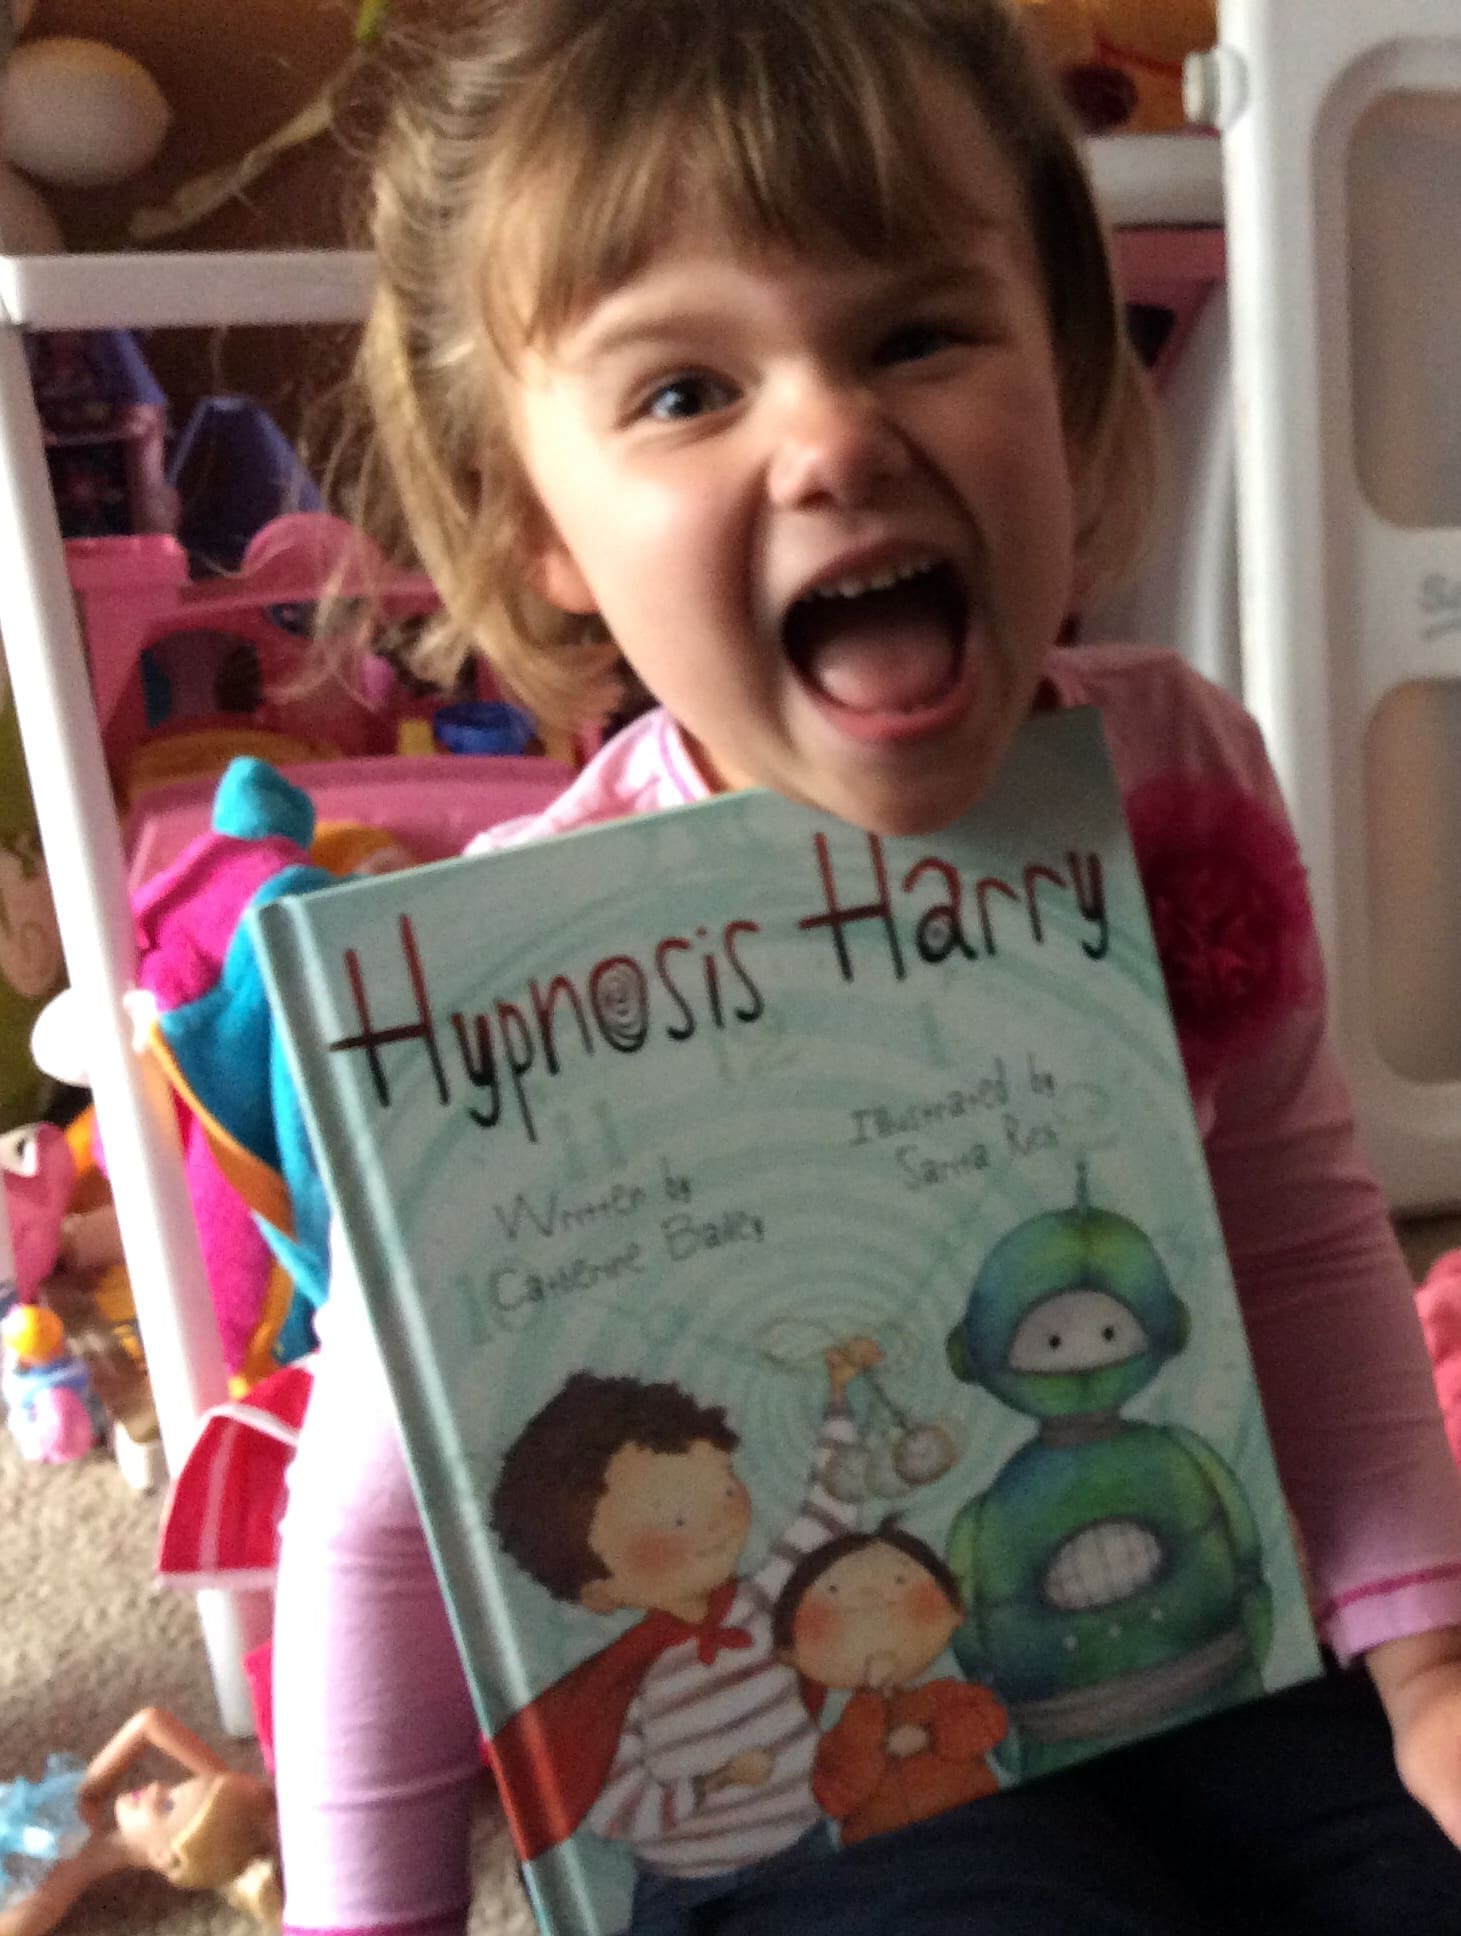 Little girl reading Hypnosis Harry Book